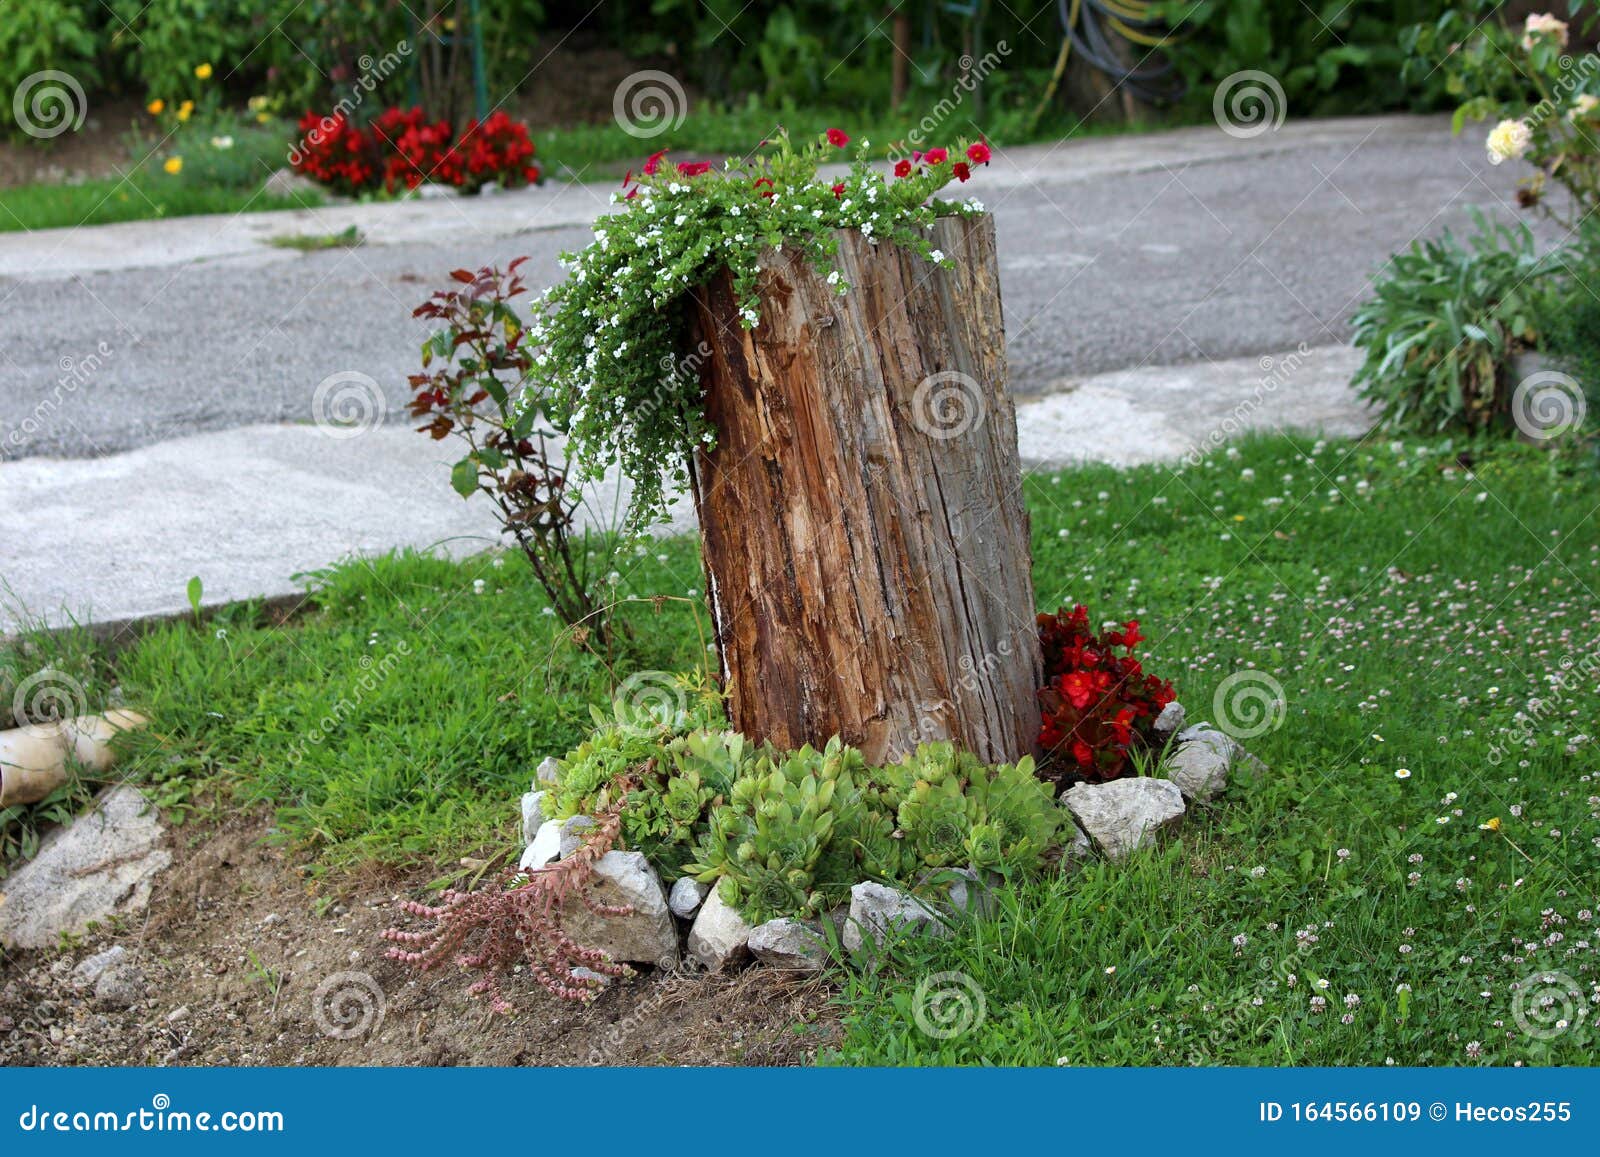 Tree Stump Left As Garden Decoration Used As Flower Pot Surrounded